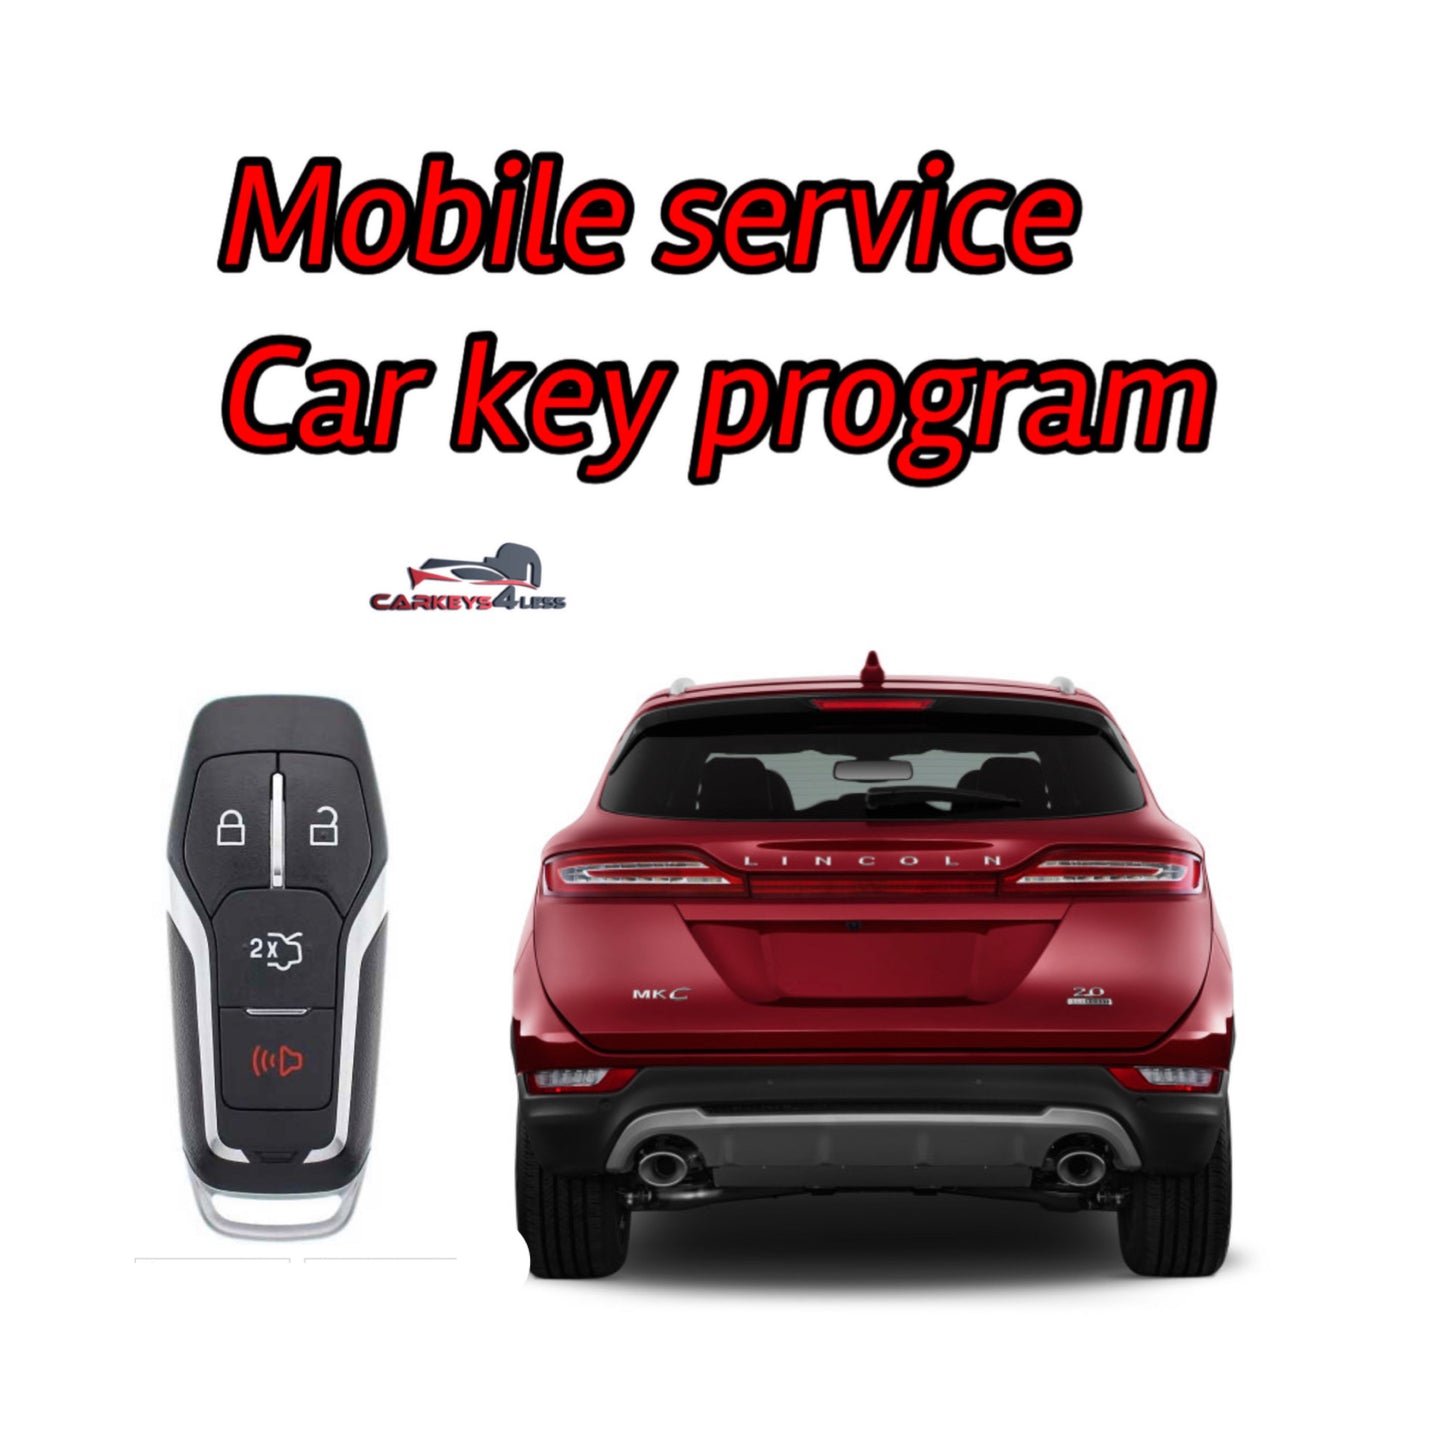 Mobile service for an aftermarket Lincoln smart key replacement